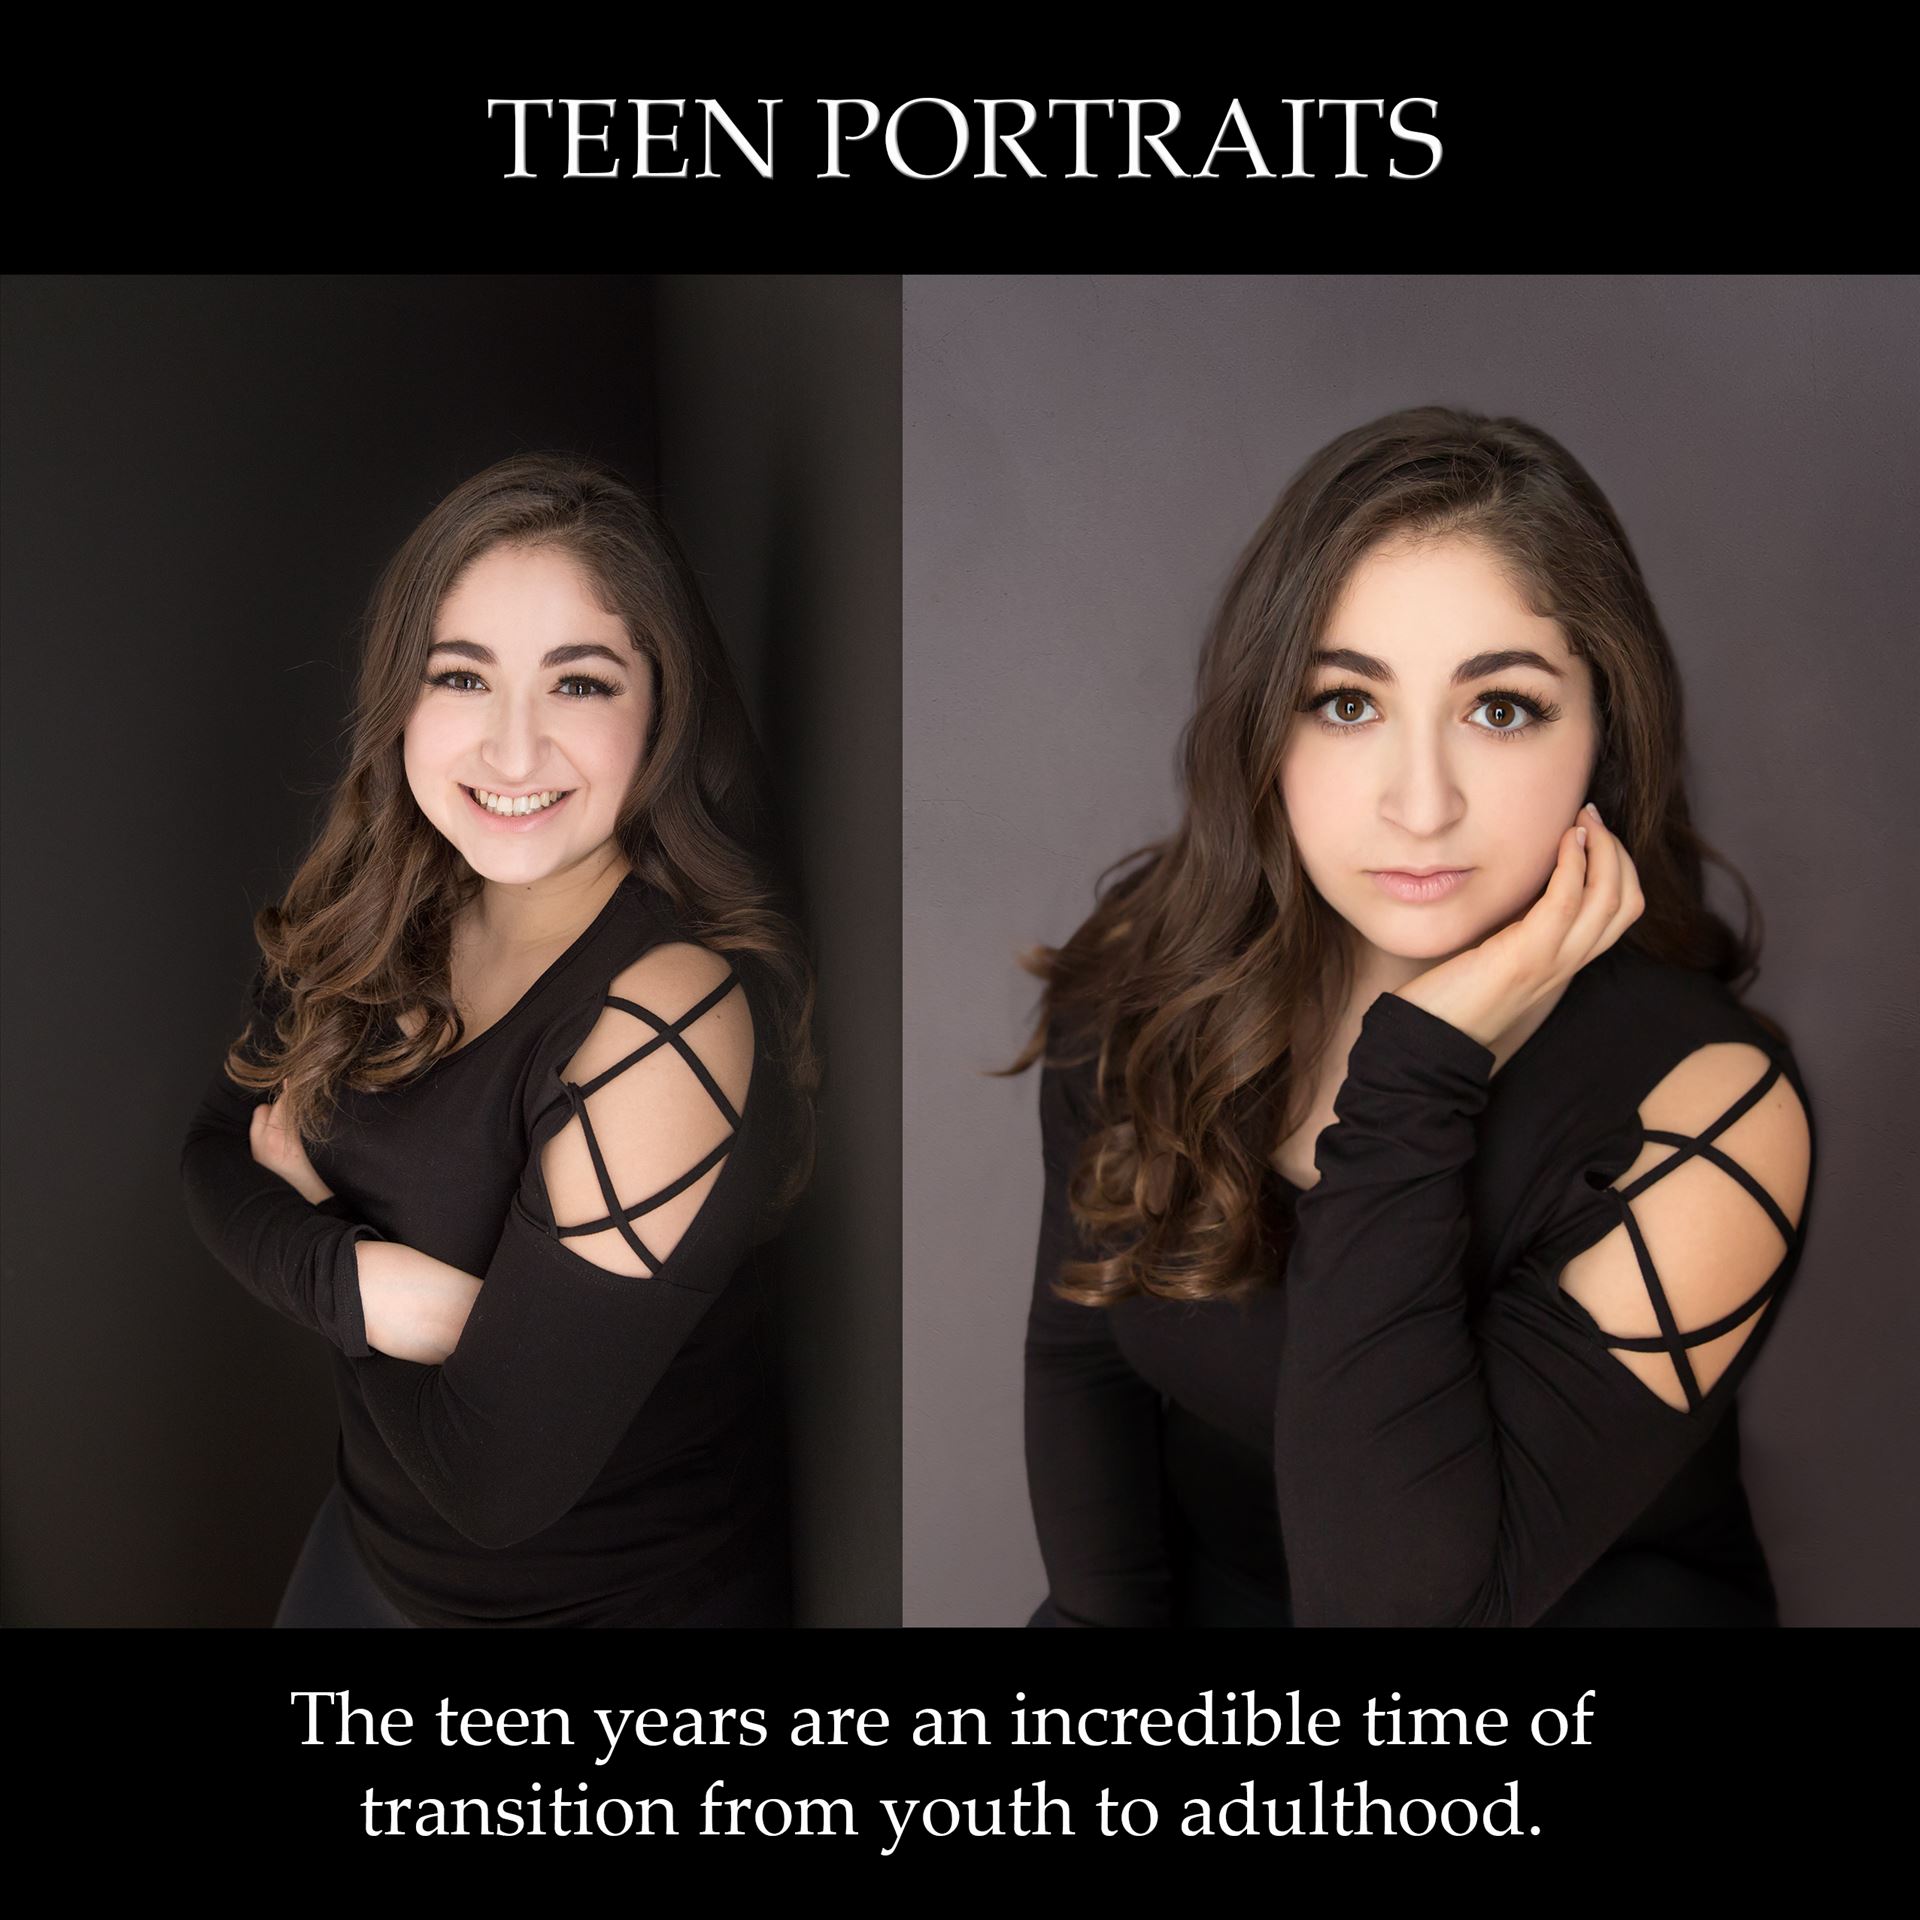 Teen-Portraits.jpg beauty portraits, beauty, portrait, headshot, personal branding by Maria Angelopoulos Photogrpahy